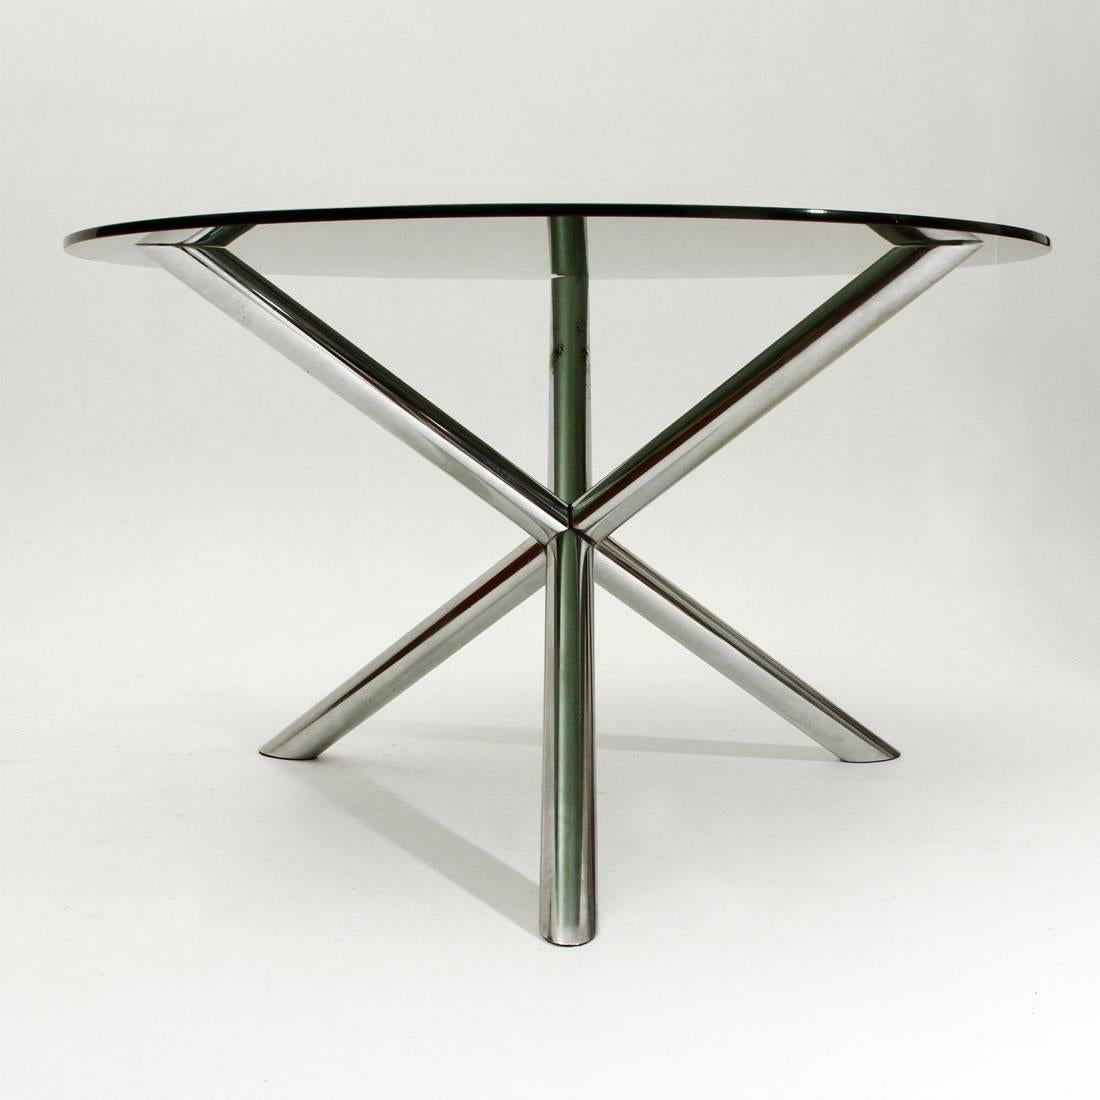 Italian Dining Table with Chromed Metal Base from Roche Bobois, 1970s